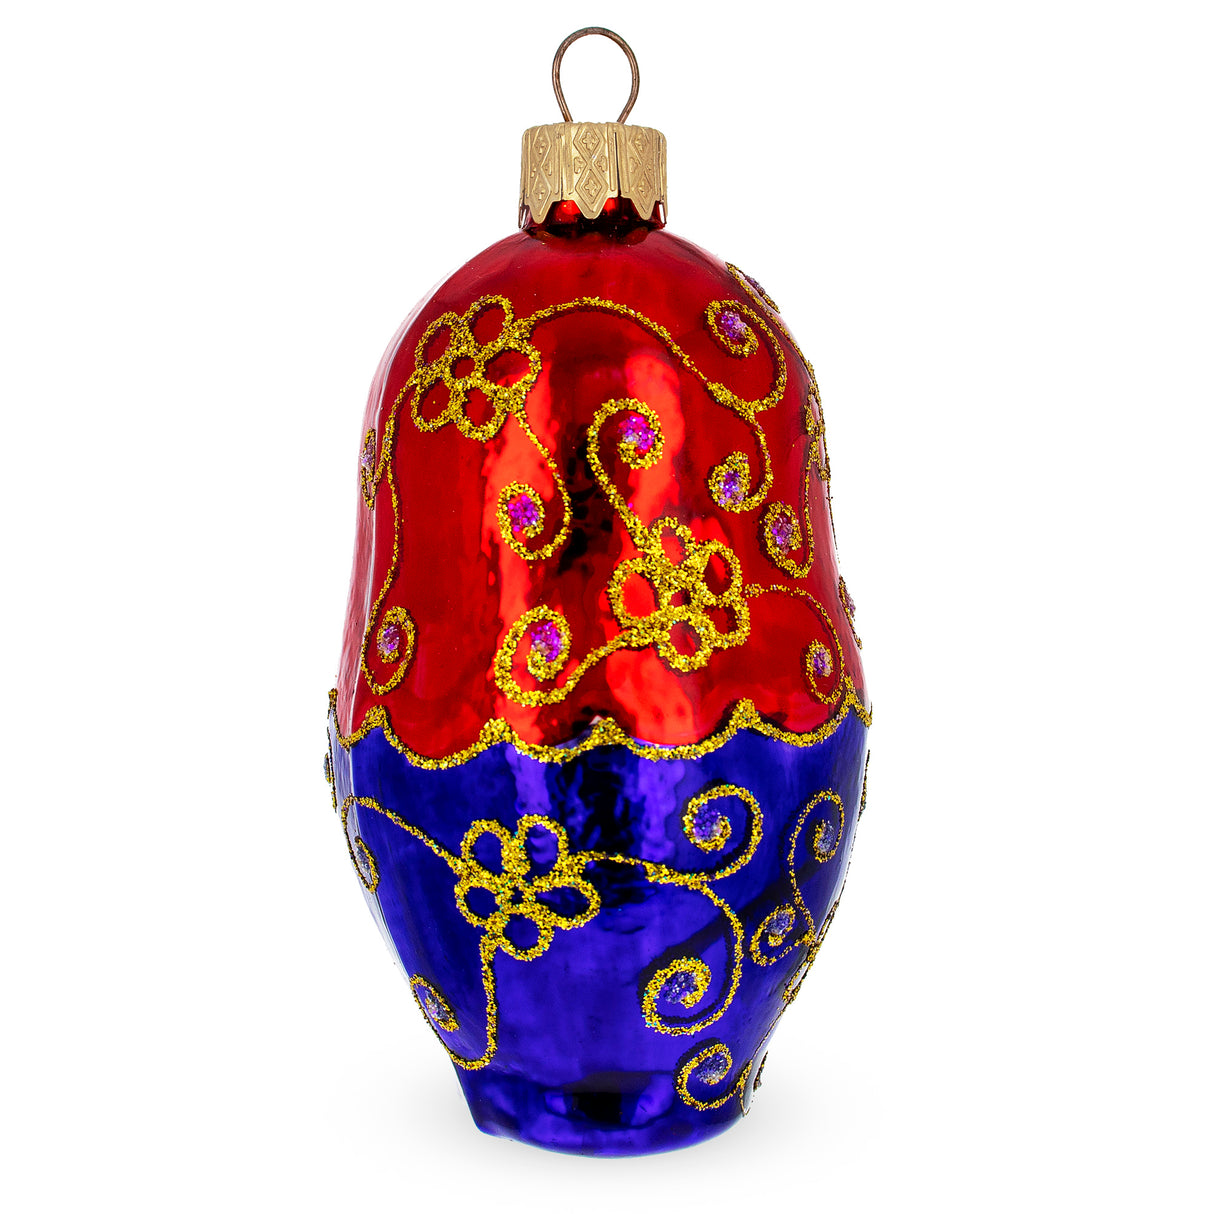 BestPysanky online gift shop sells mouth blown hand made painted xmas decor decorations figurine unique luxury collectible heirloom vintage whimsical elegant festive balls baubles old fashioned european german collection artisan hanging pendants personalized